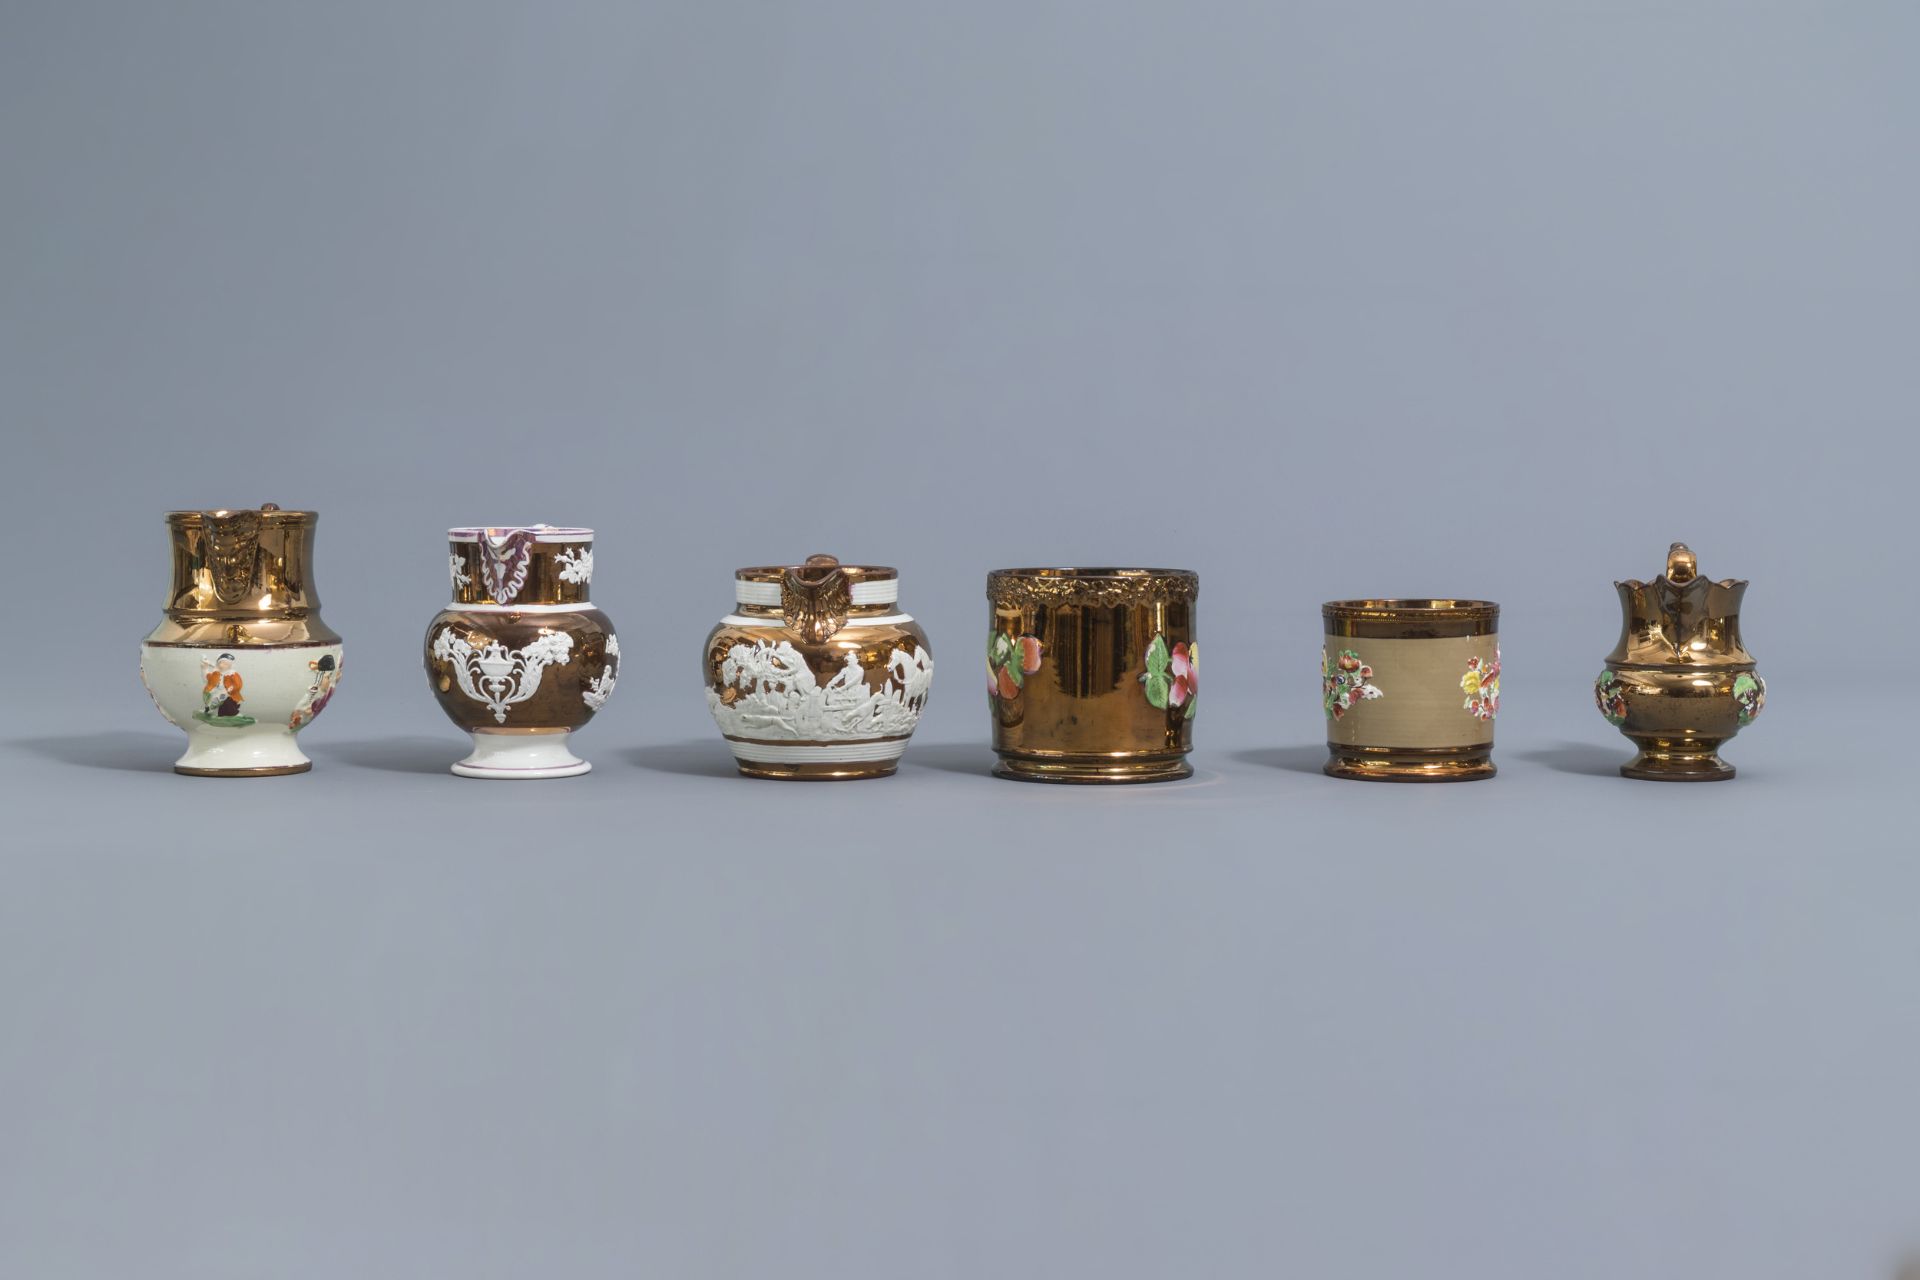 A varied collection of English lustreware items with relief design, 19th C. - Image 46 of 50